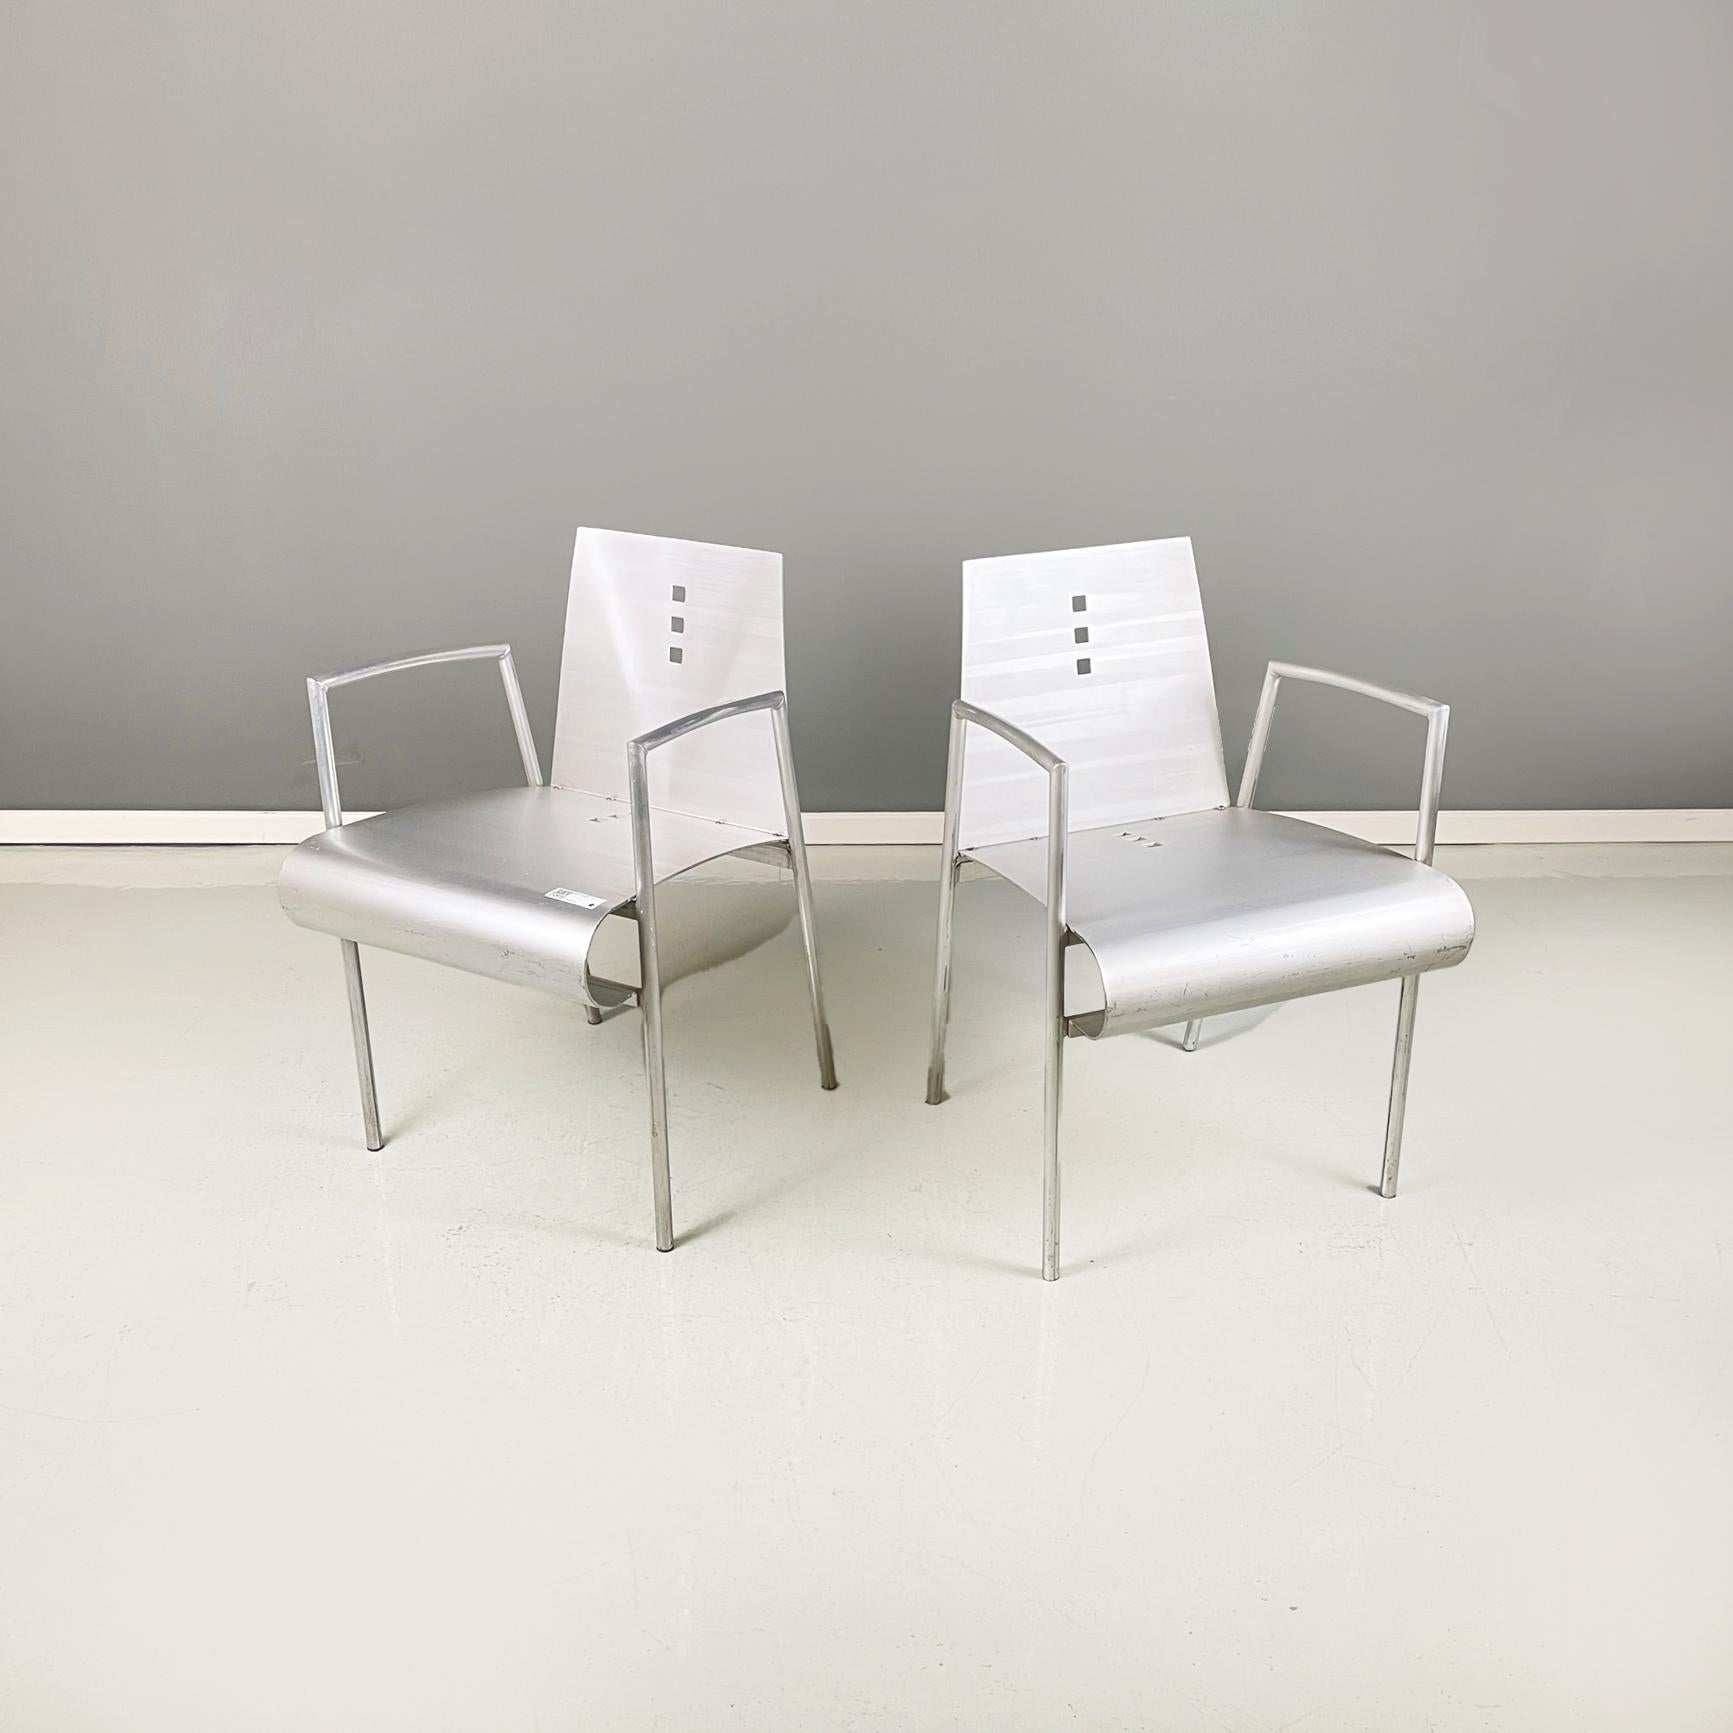 Italian modern curved metal chairs with armrests, 1980s.
Pair of chairs with curved metal seat and back. The legs and armrests are made of tubular metal.
1980s
Very good conditions, they have light scattered scratches.
Measurements in cm